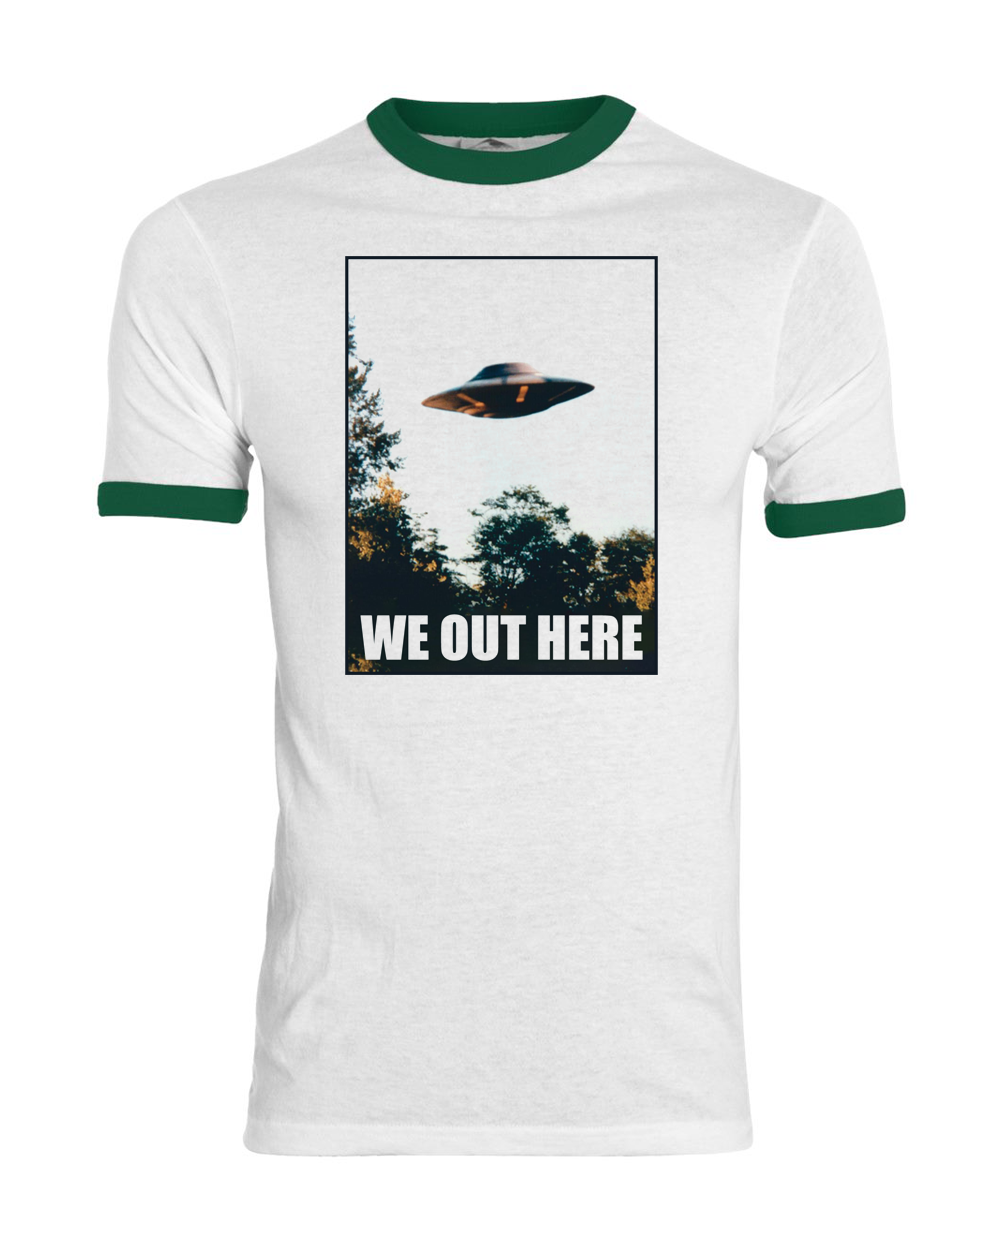 KHP “We Out Here” Unisex T-Shirt